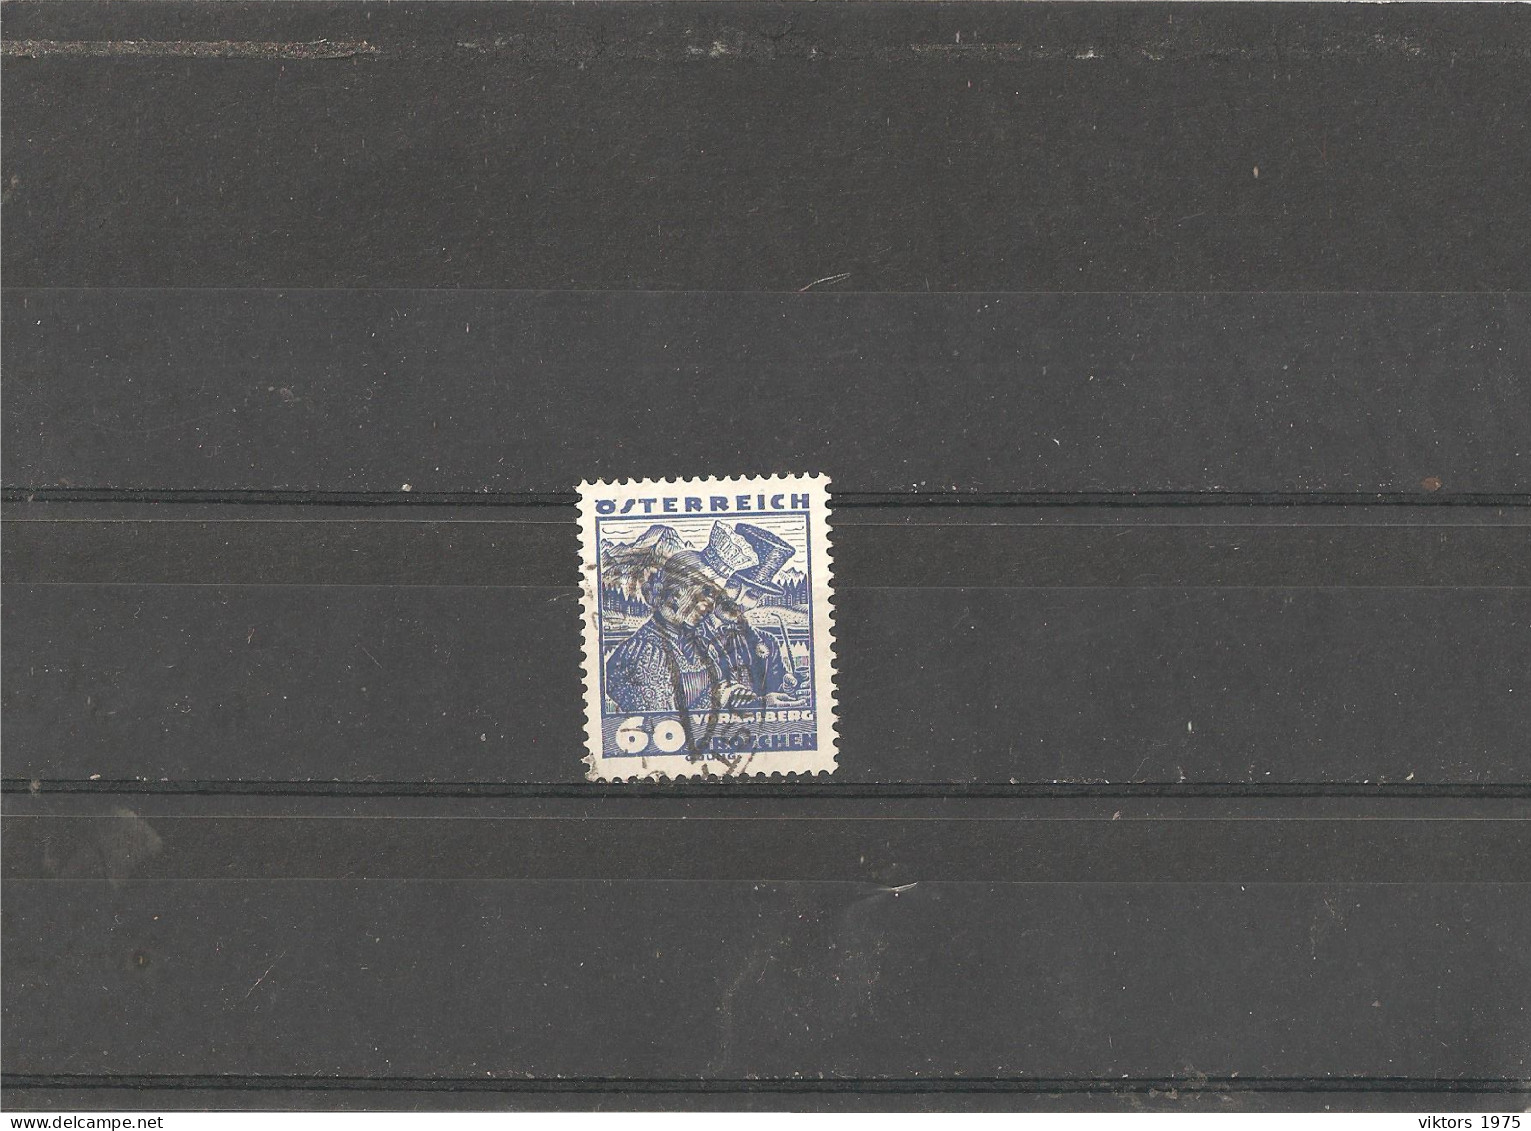 Used Stamp Nr.581 In MICHEL Catalog - Used Stamps